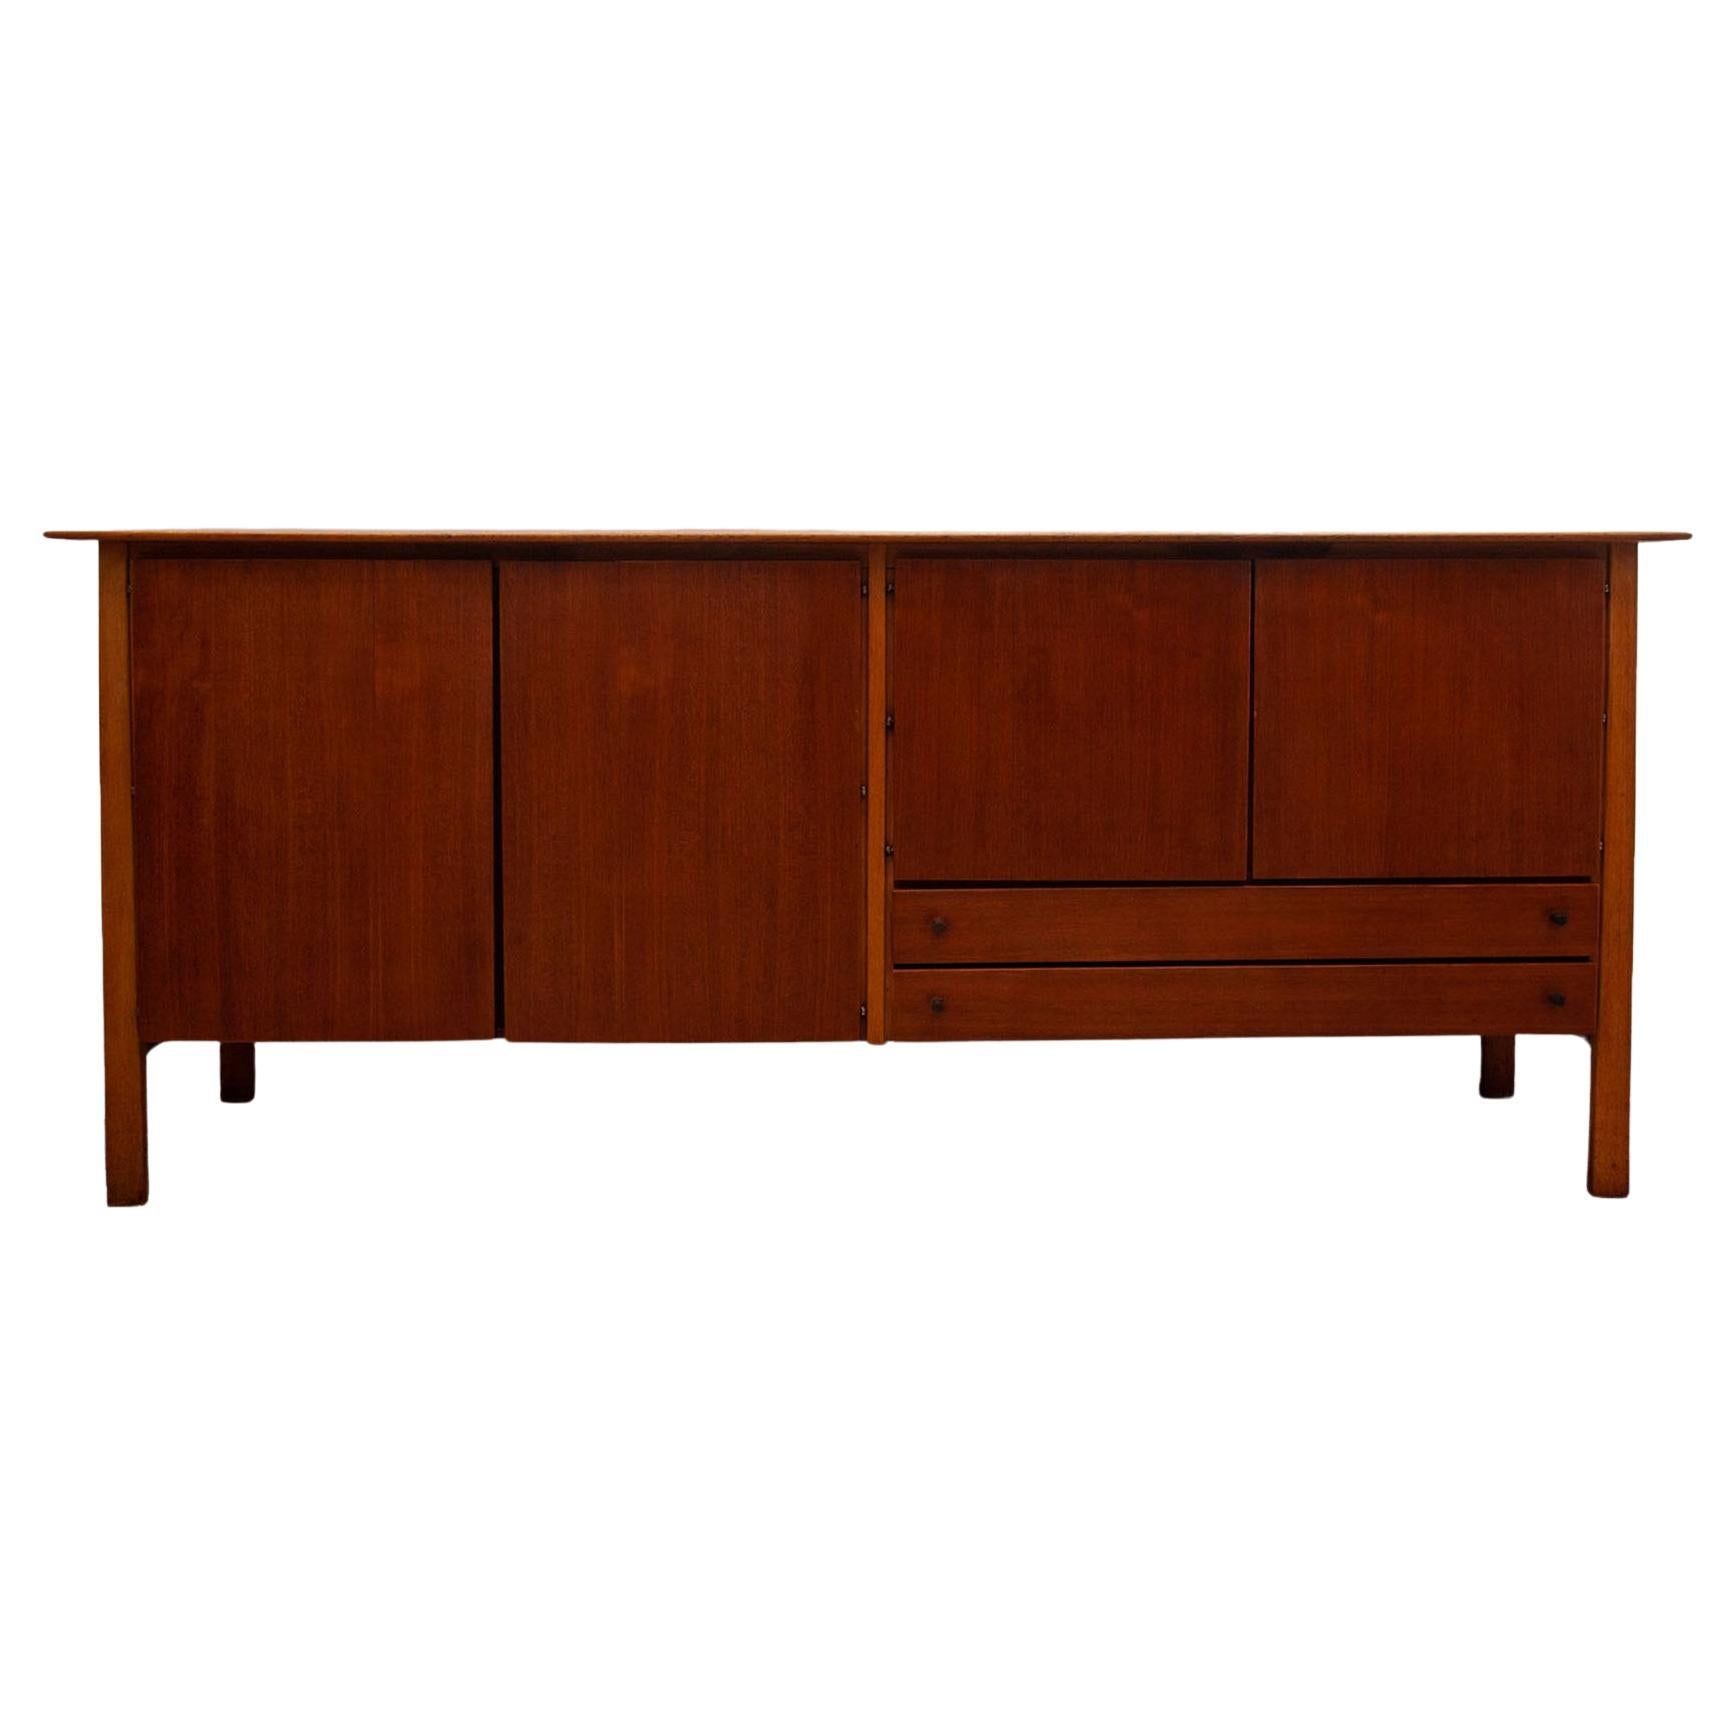 Large High Teak Sideboard with Floating Top 1950s, Made in Denmark For Sale